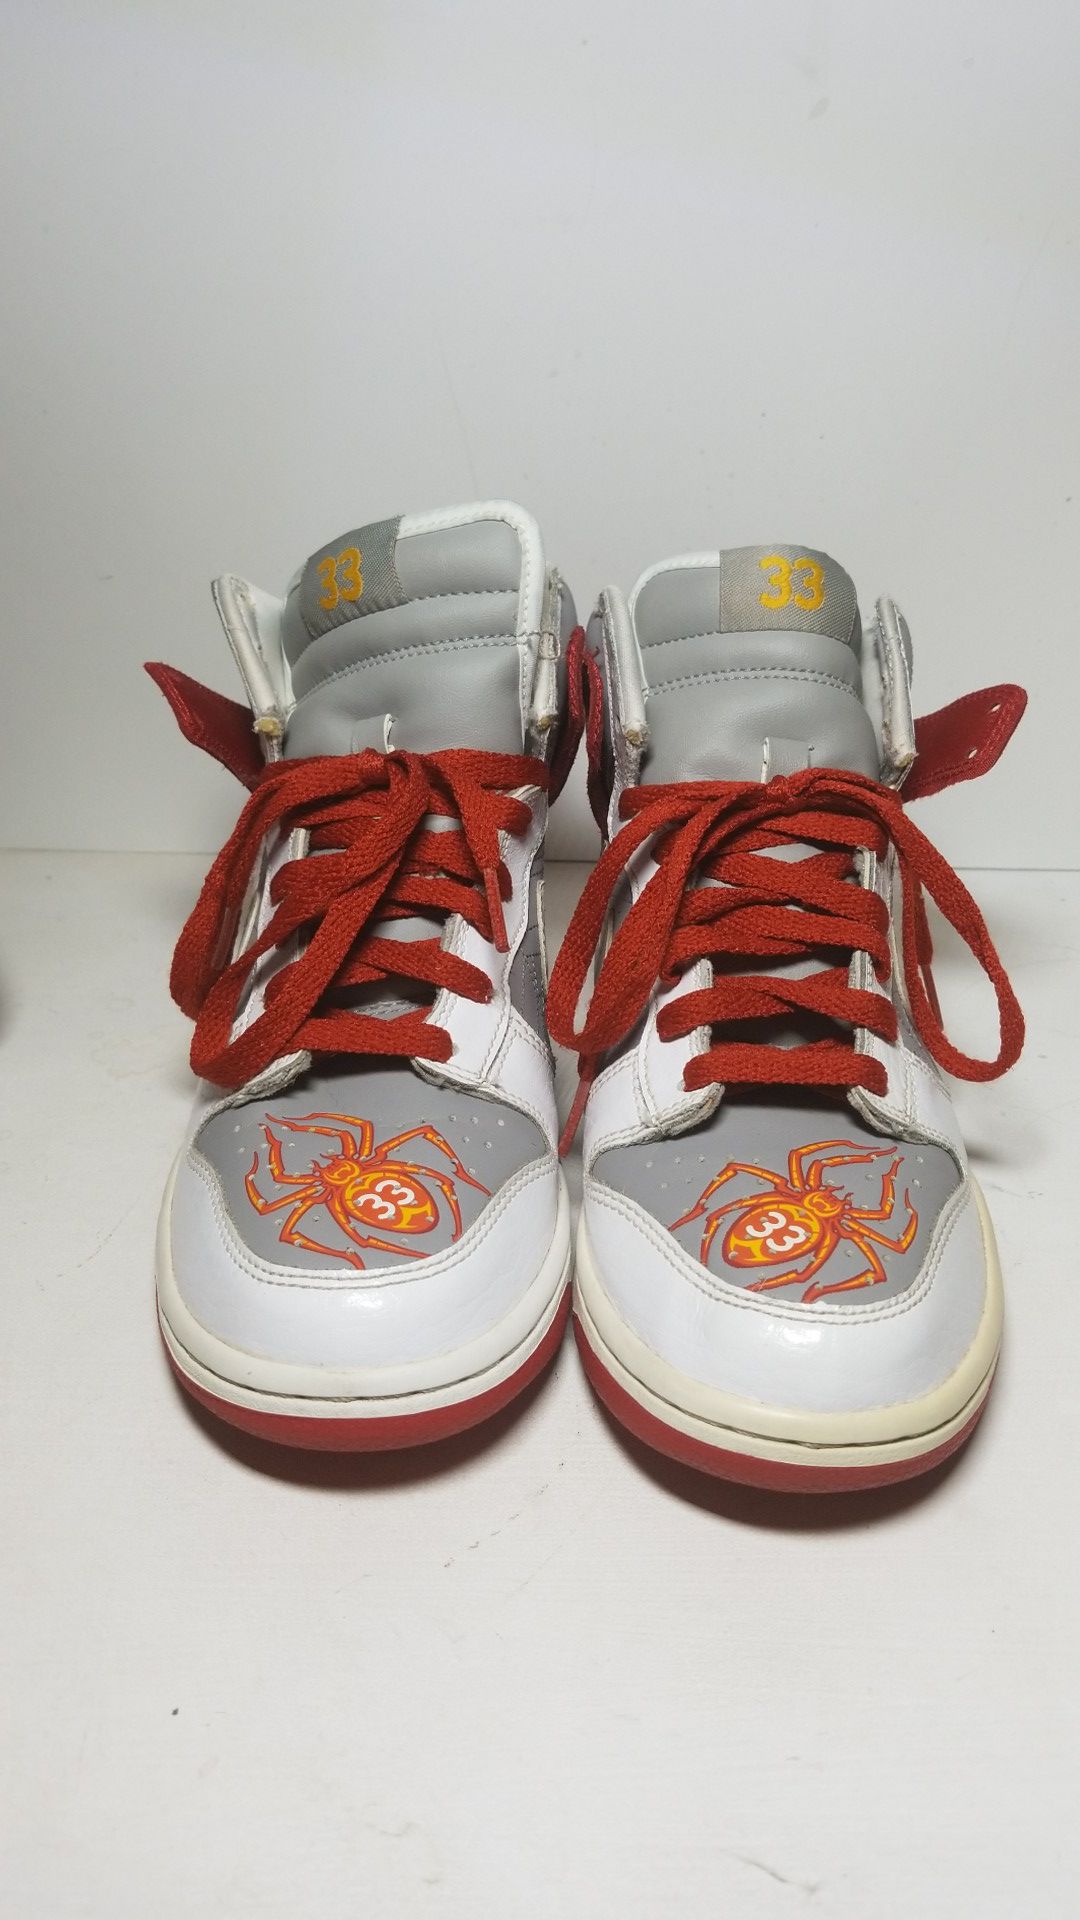 Nike Dunk High Premium Spider 33 Sneakers Youth 5.5Y for Sale in Chicago, IL OfferUp